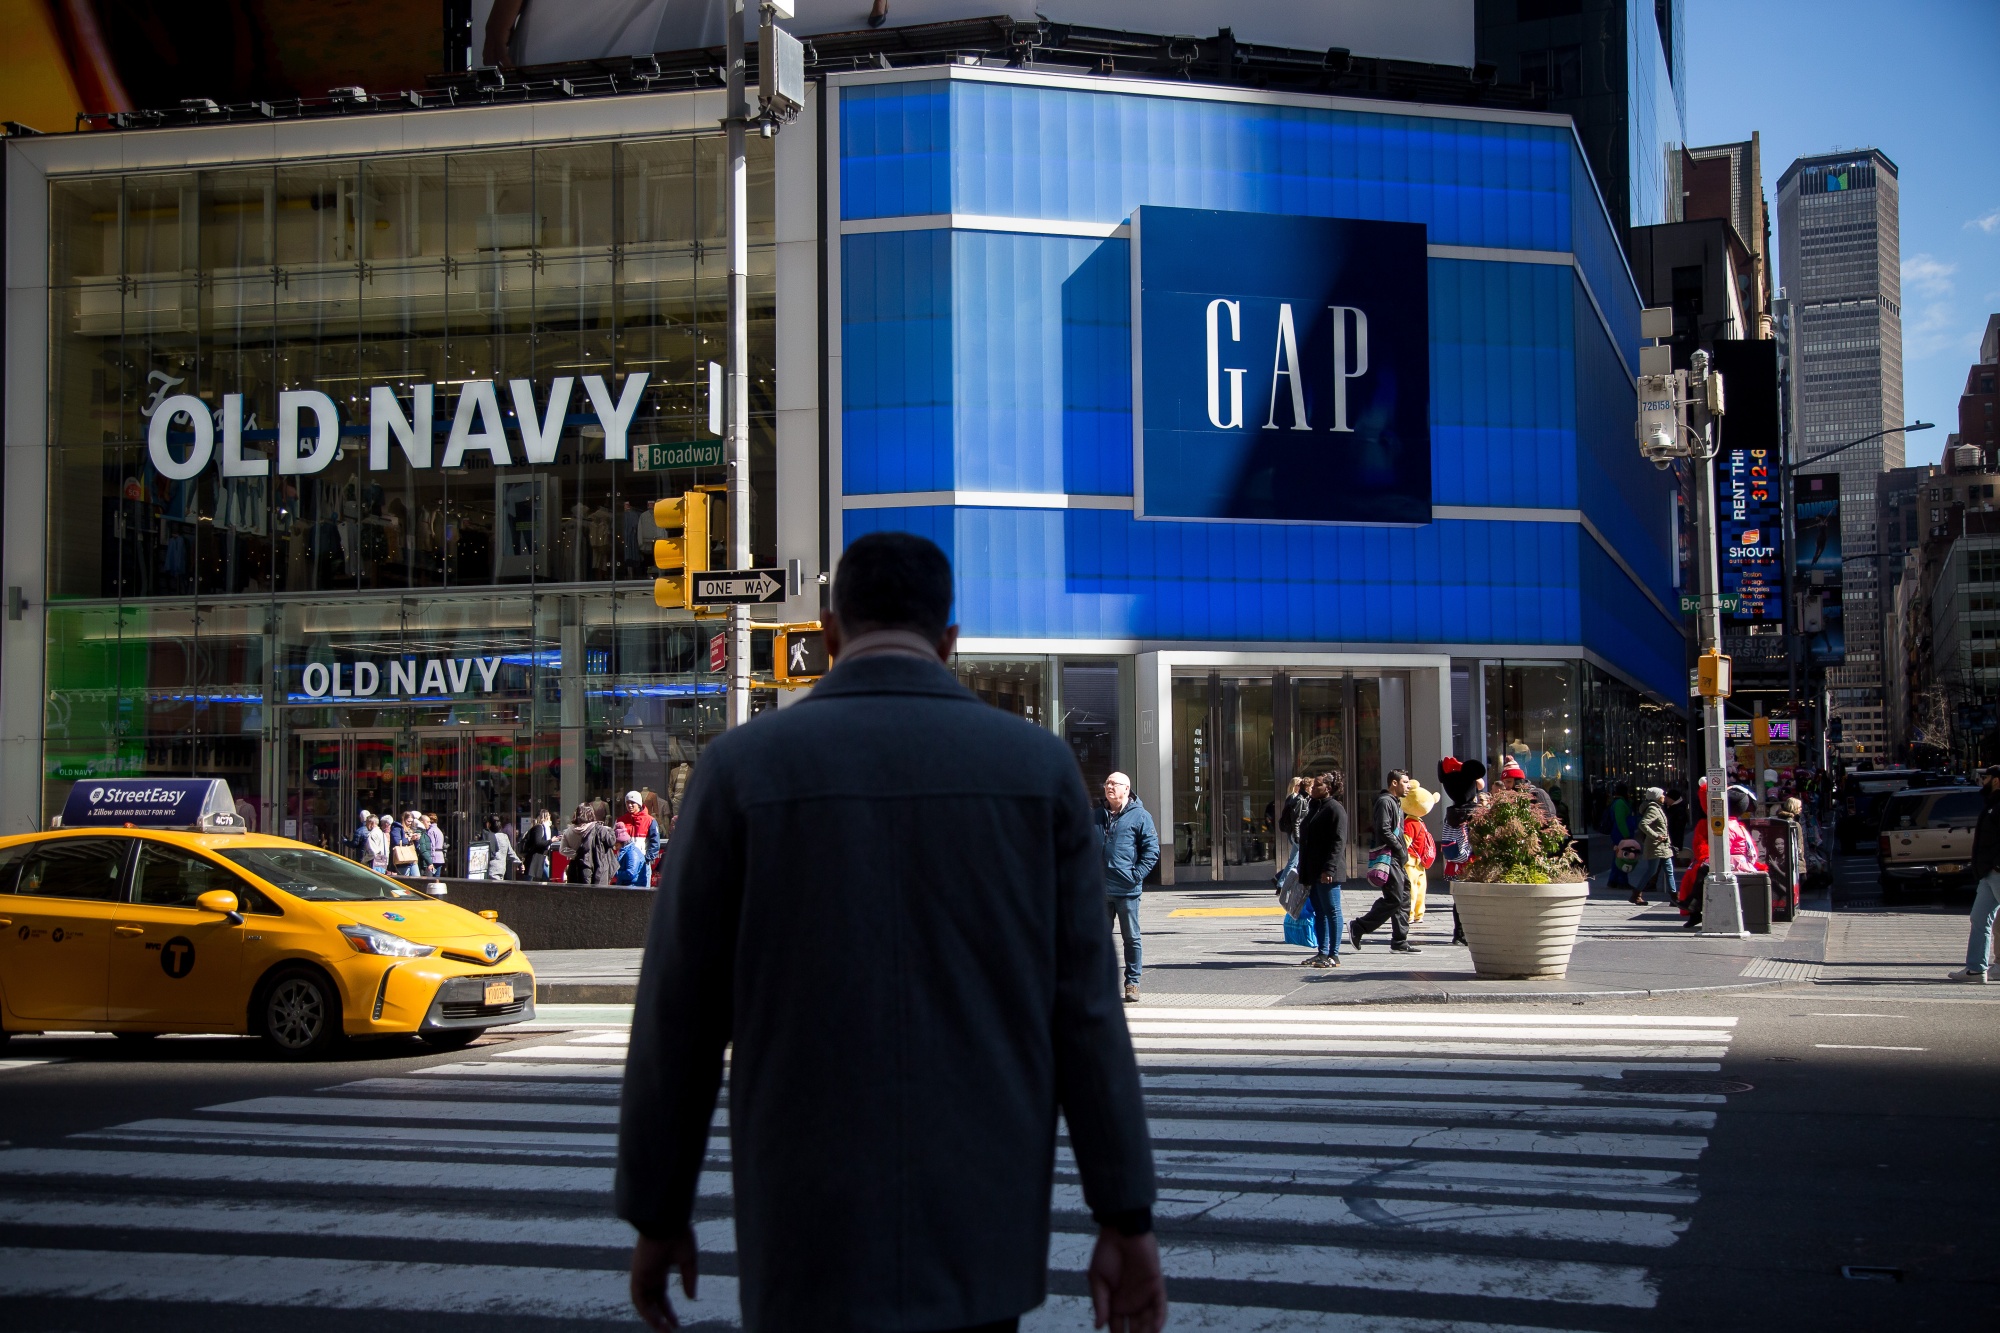 Fresh Off Barbie Movie, Gap's New CEO Aims to Lift GPS Stock - Bloomberg